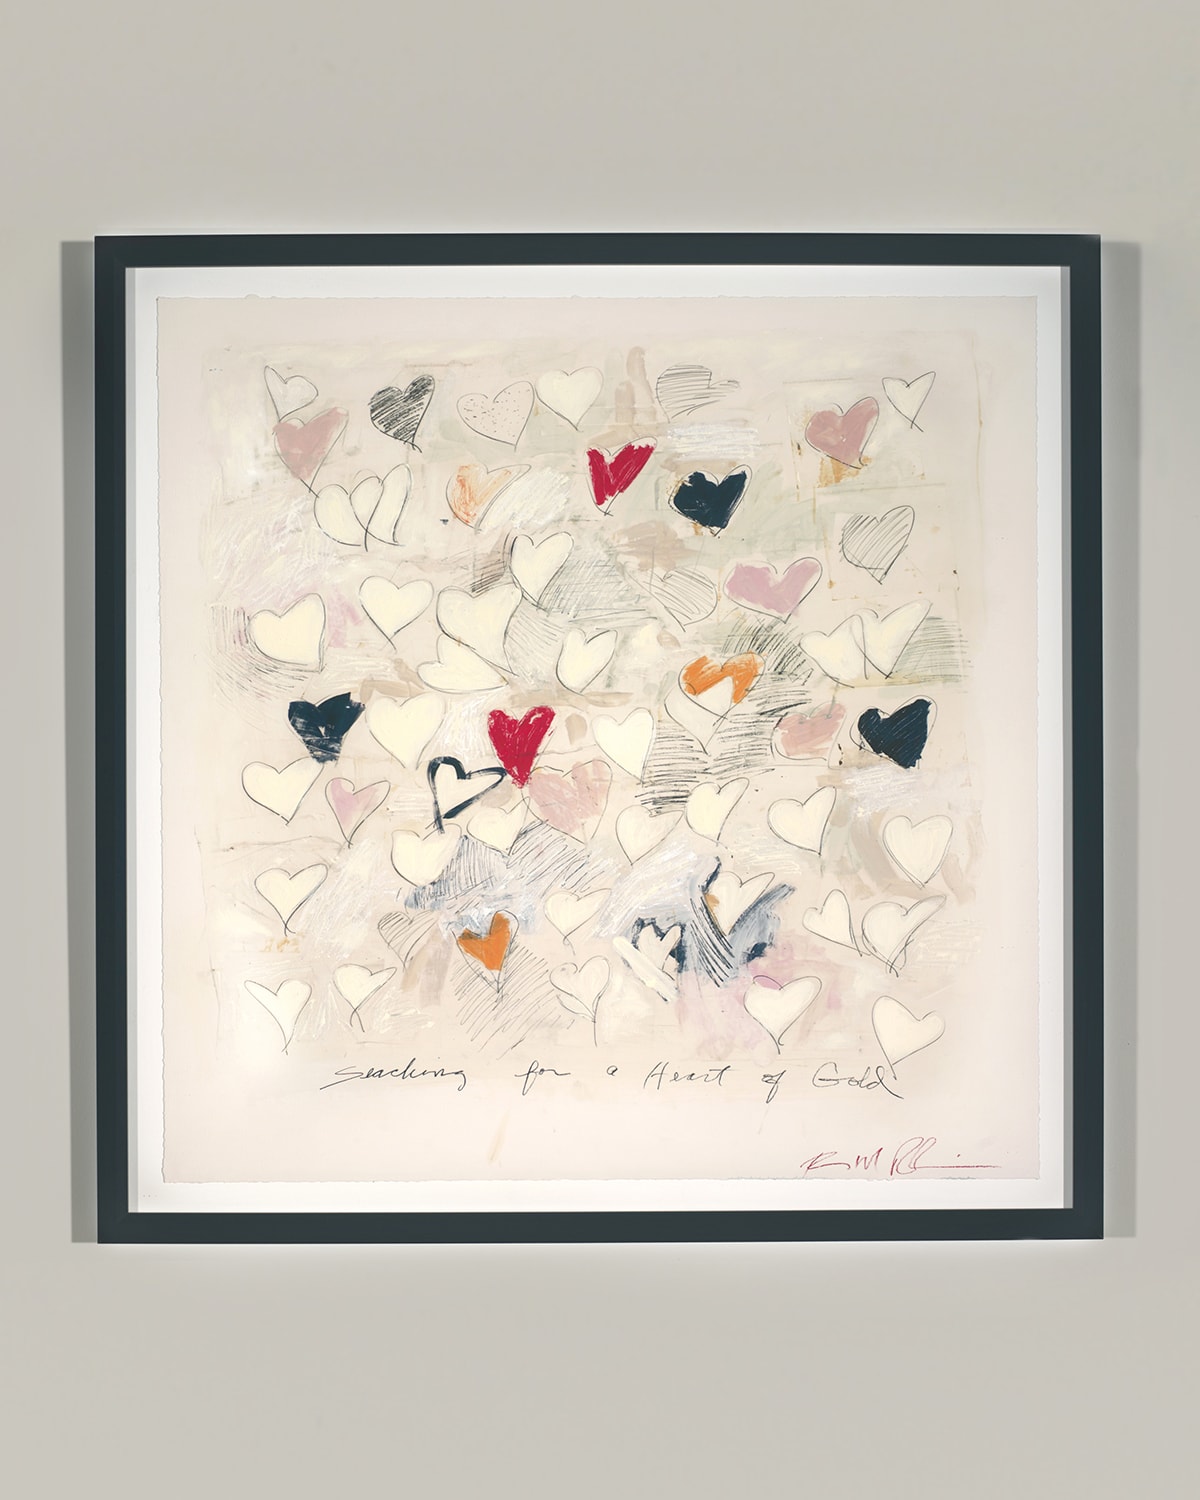 Shop Rfa Fine Art Searching For A Heart Of Gold #2 Giclee Wall Art By Robert Robinson In Multi